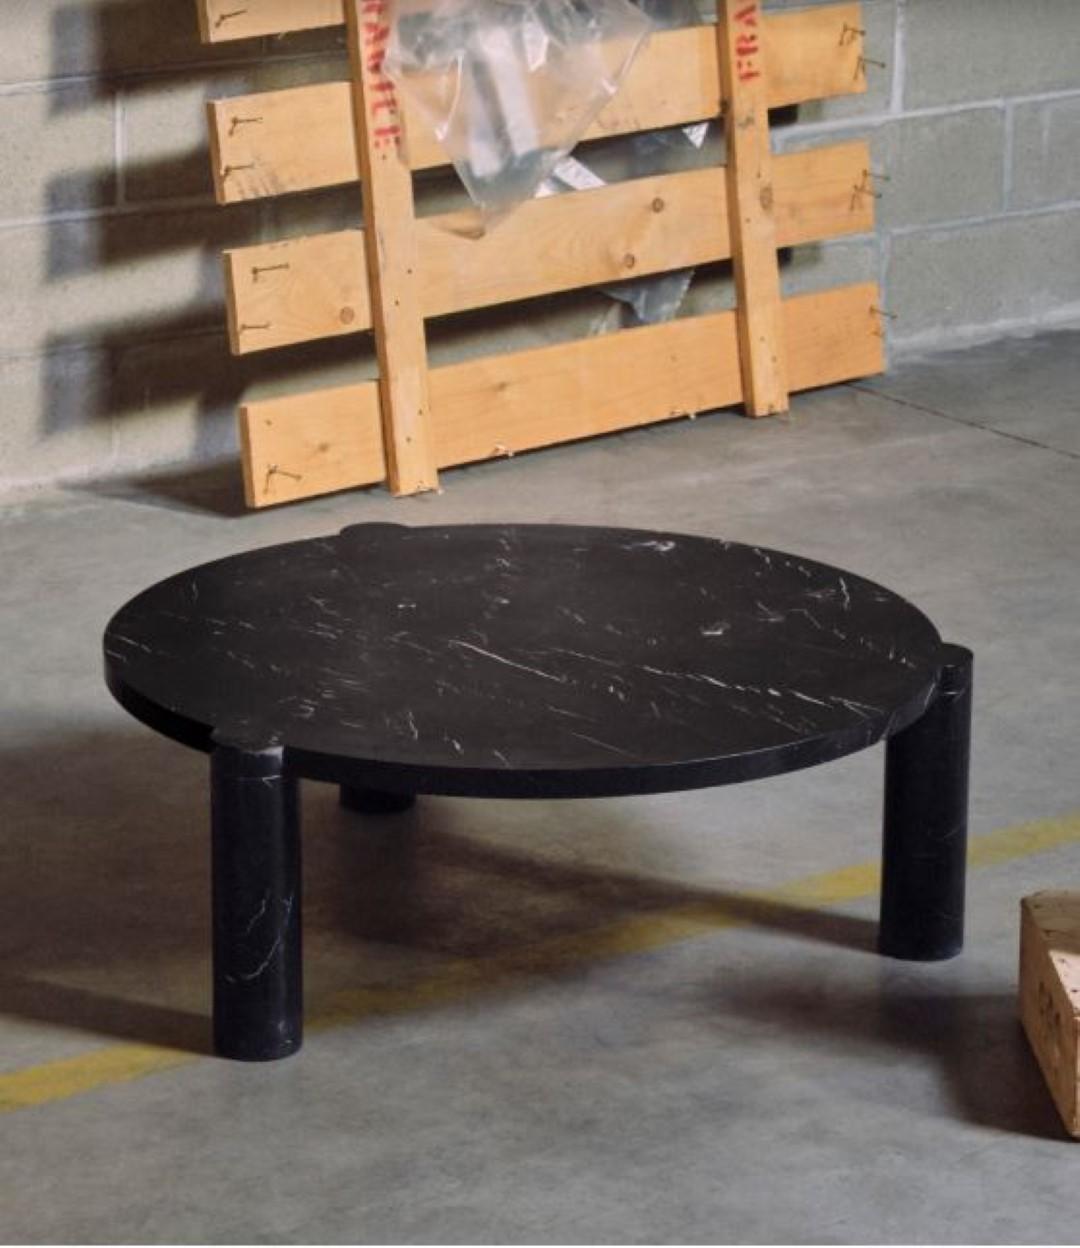 Black marble Alexis 90 coffee table by Agglomerati
Dimensions: D 90 x H 33 cm.
Materials: Black Marquina Marble.
Available in other stones. 

Alexis coffee table has off-set, cylindrical legs that curve flush underneath the tabletop, providing a